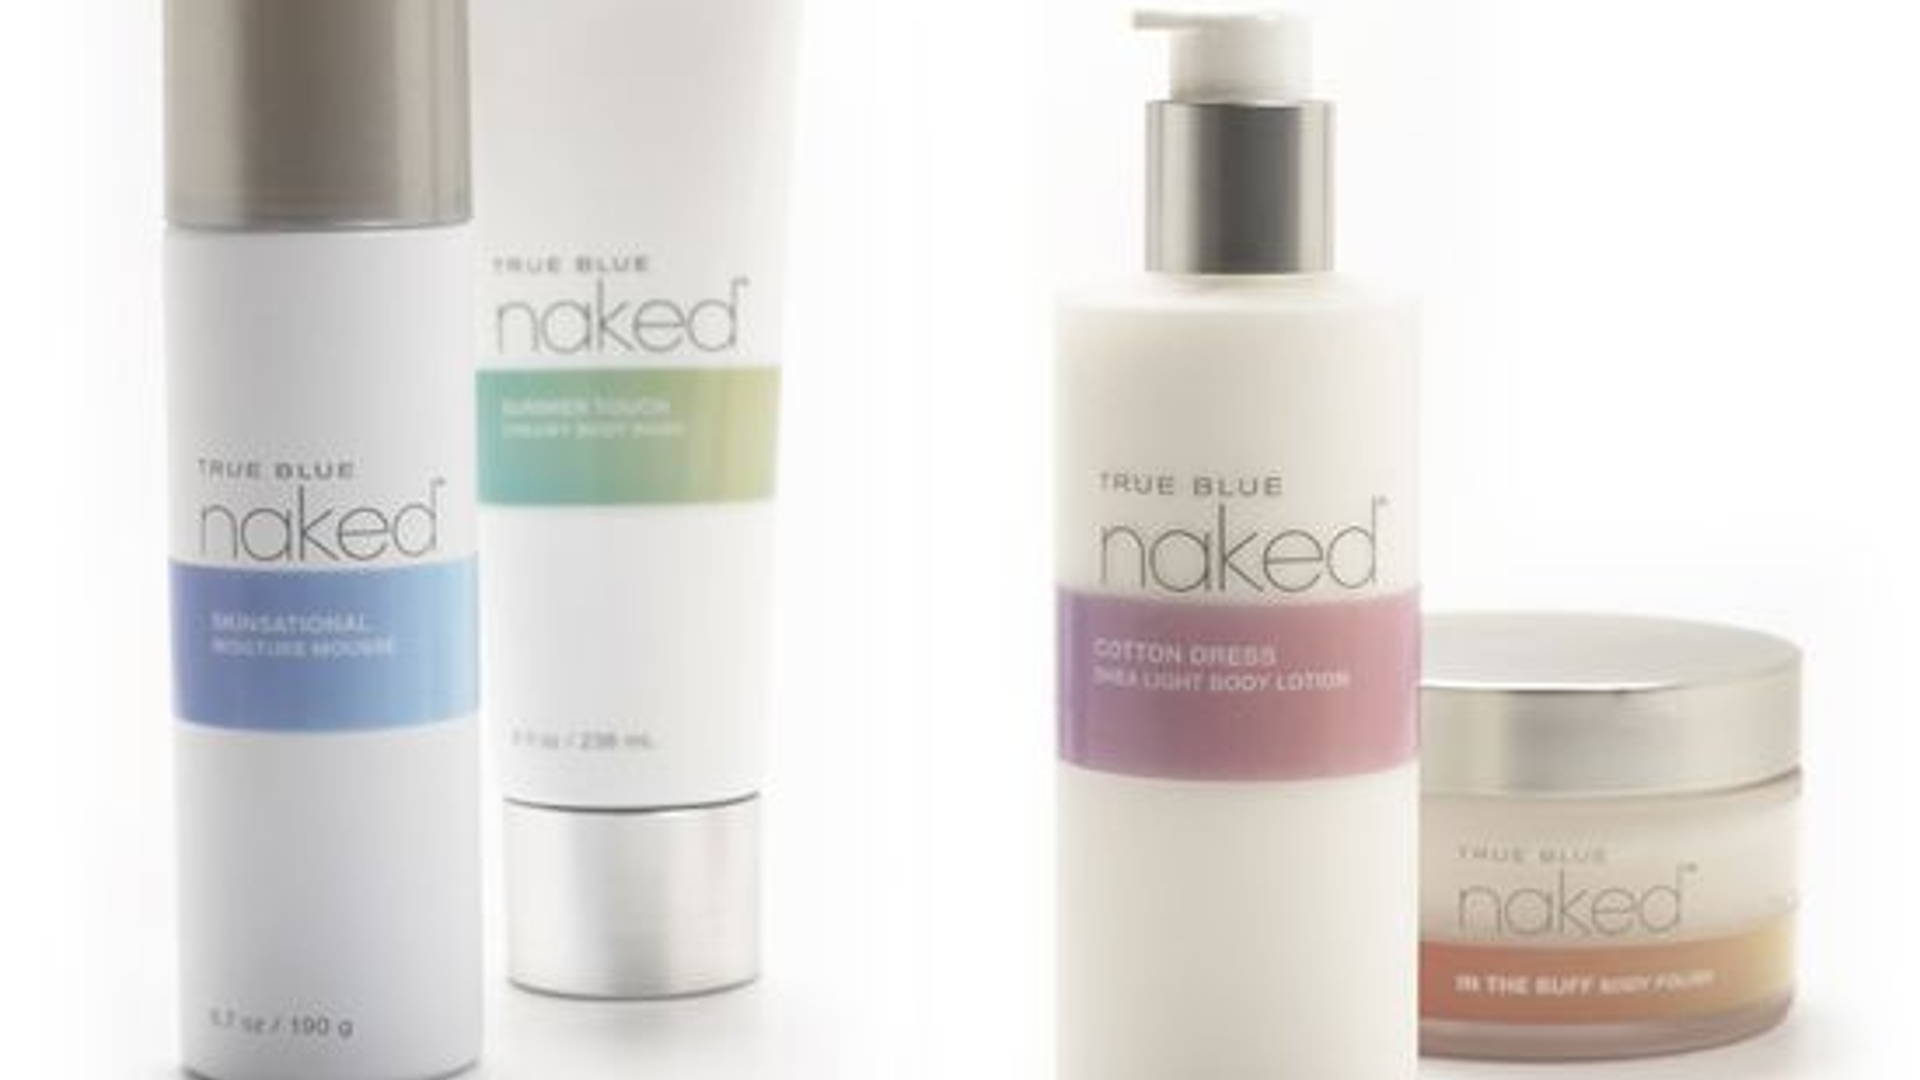 Featured image for True Blue Naked